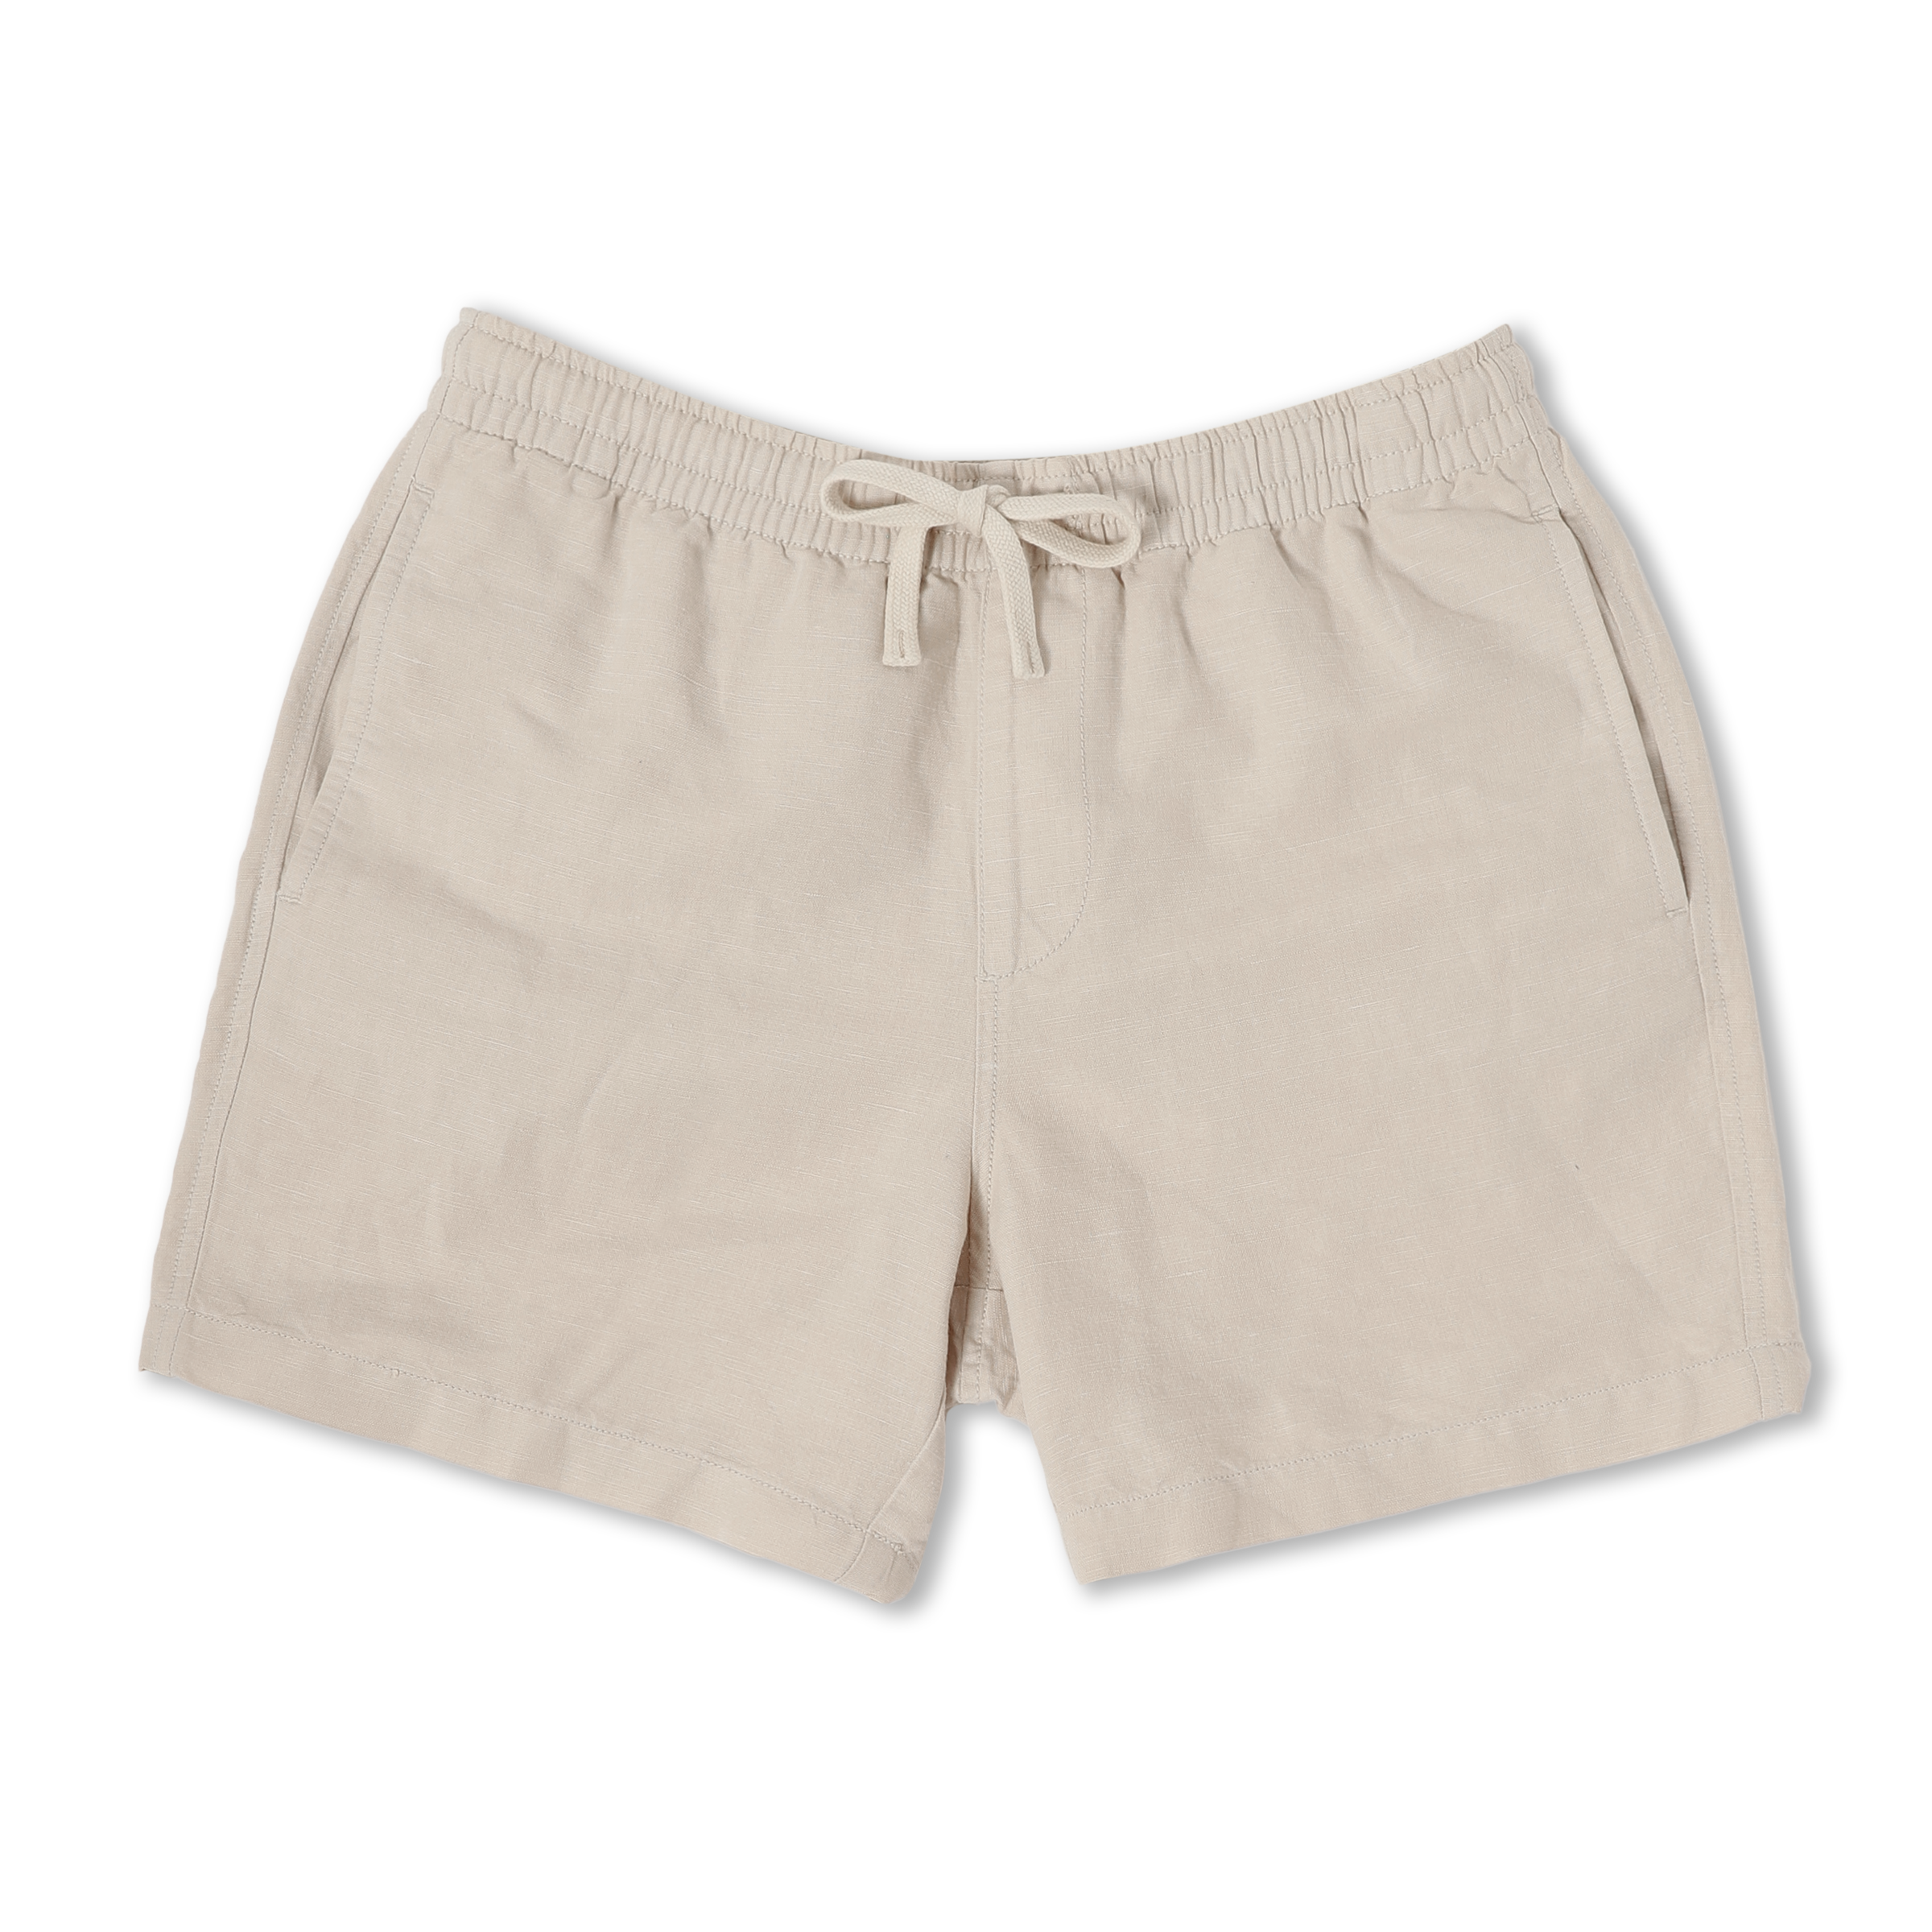 Retreat Linen Short Beige front with an elastic waistband, two side seam pockets, faux fly, and dyed to match drawstring